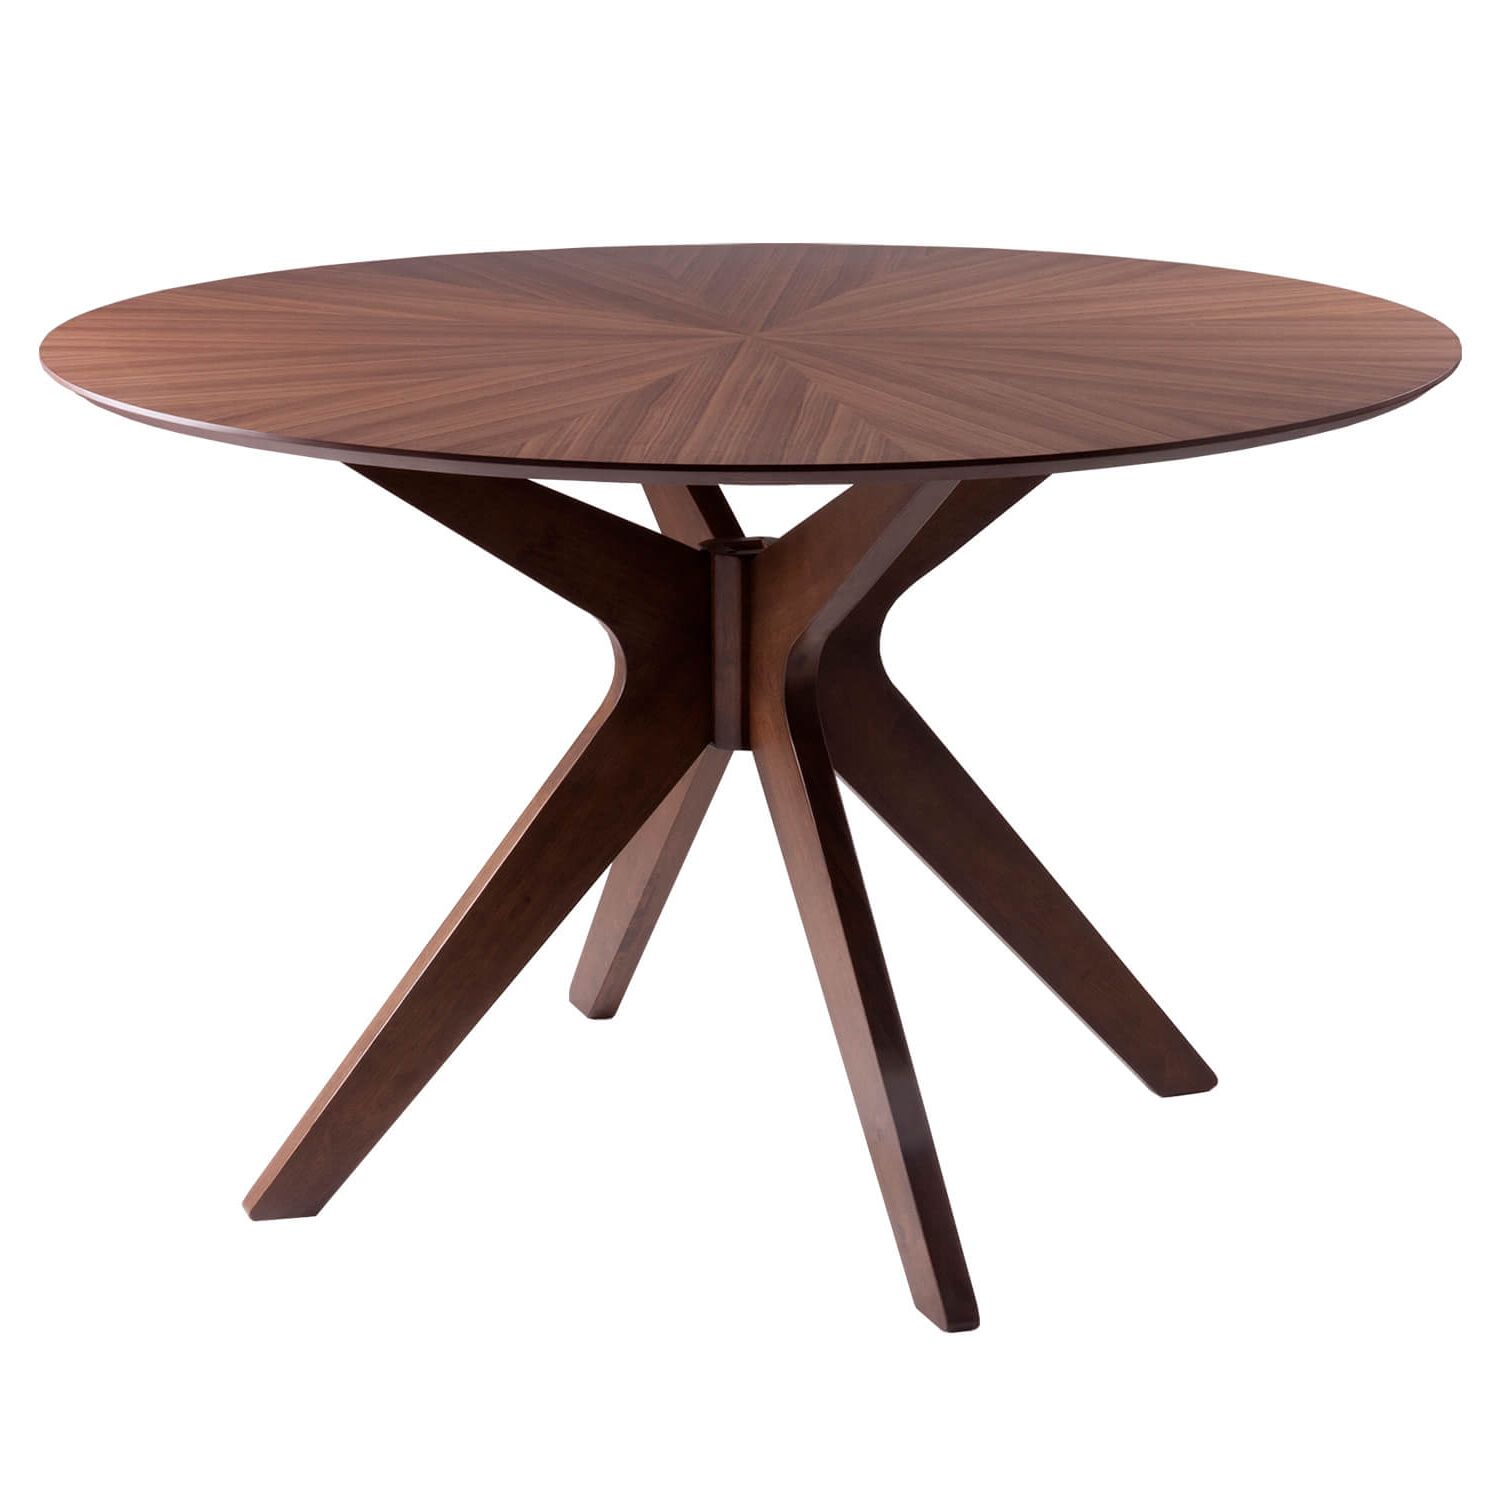 Carmel Table In Walnut 120cm – Restylit Shop – Dreamy Interiors In Most Up To Date Round Industrial Outdoor Tables (View 10 of 15)